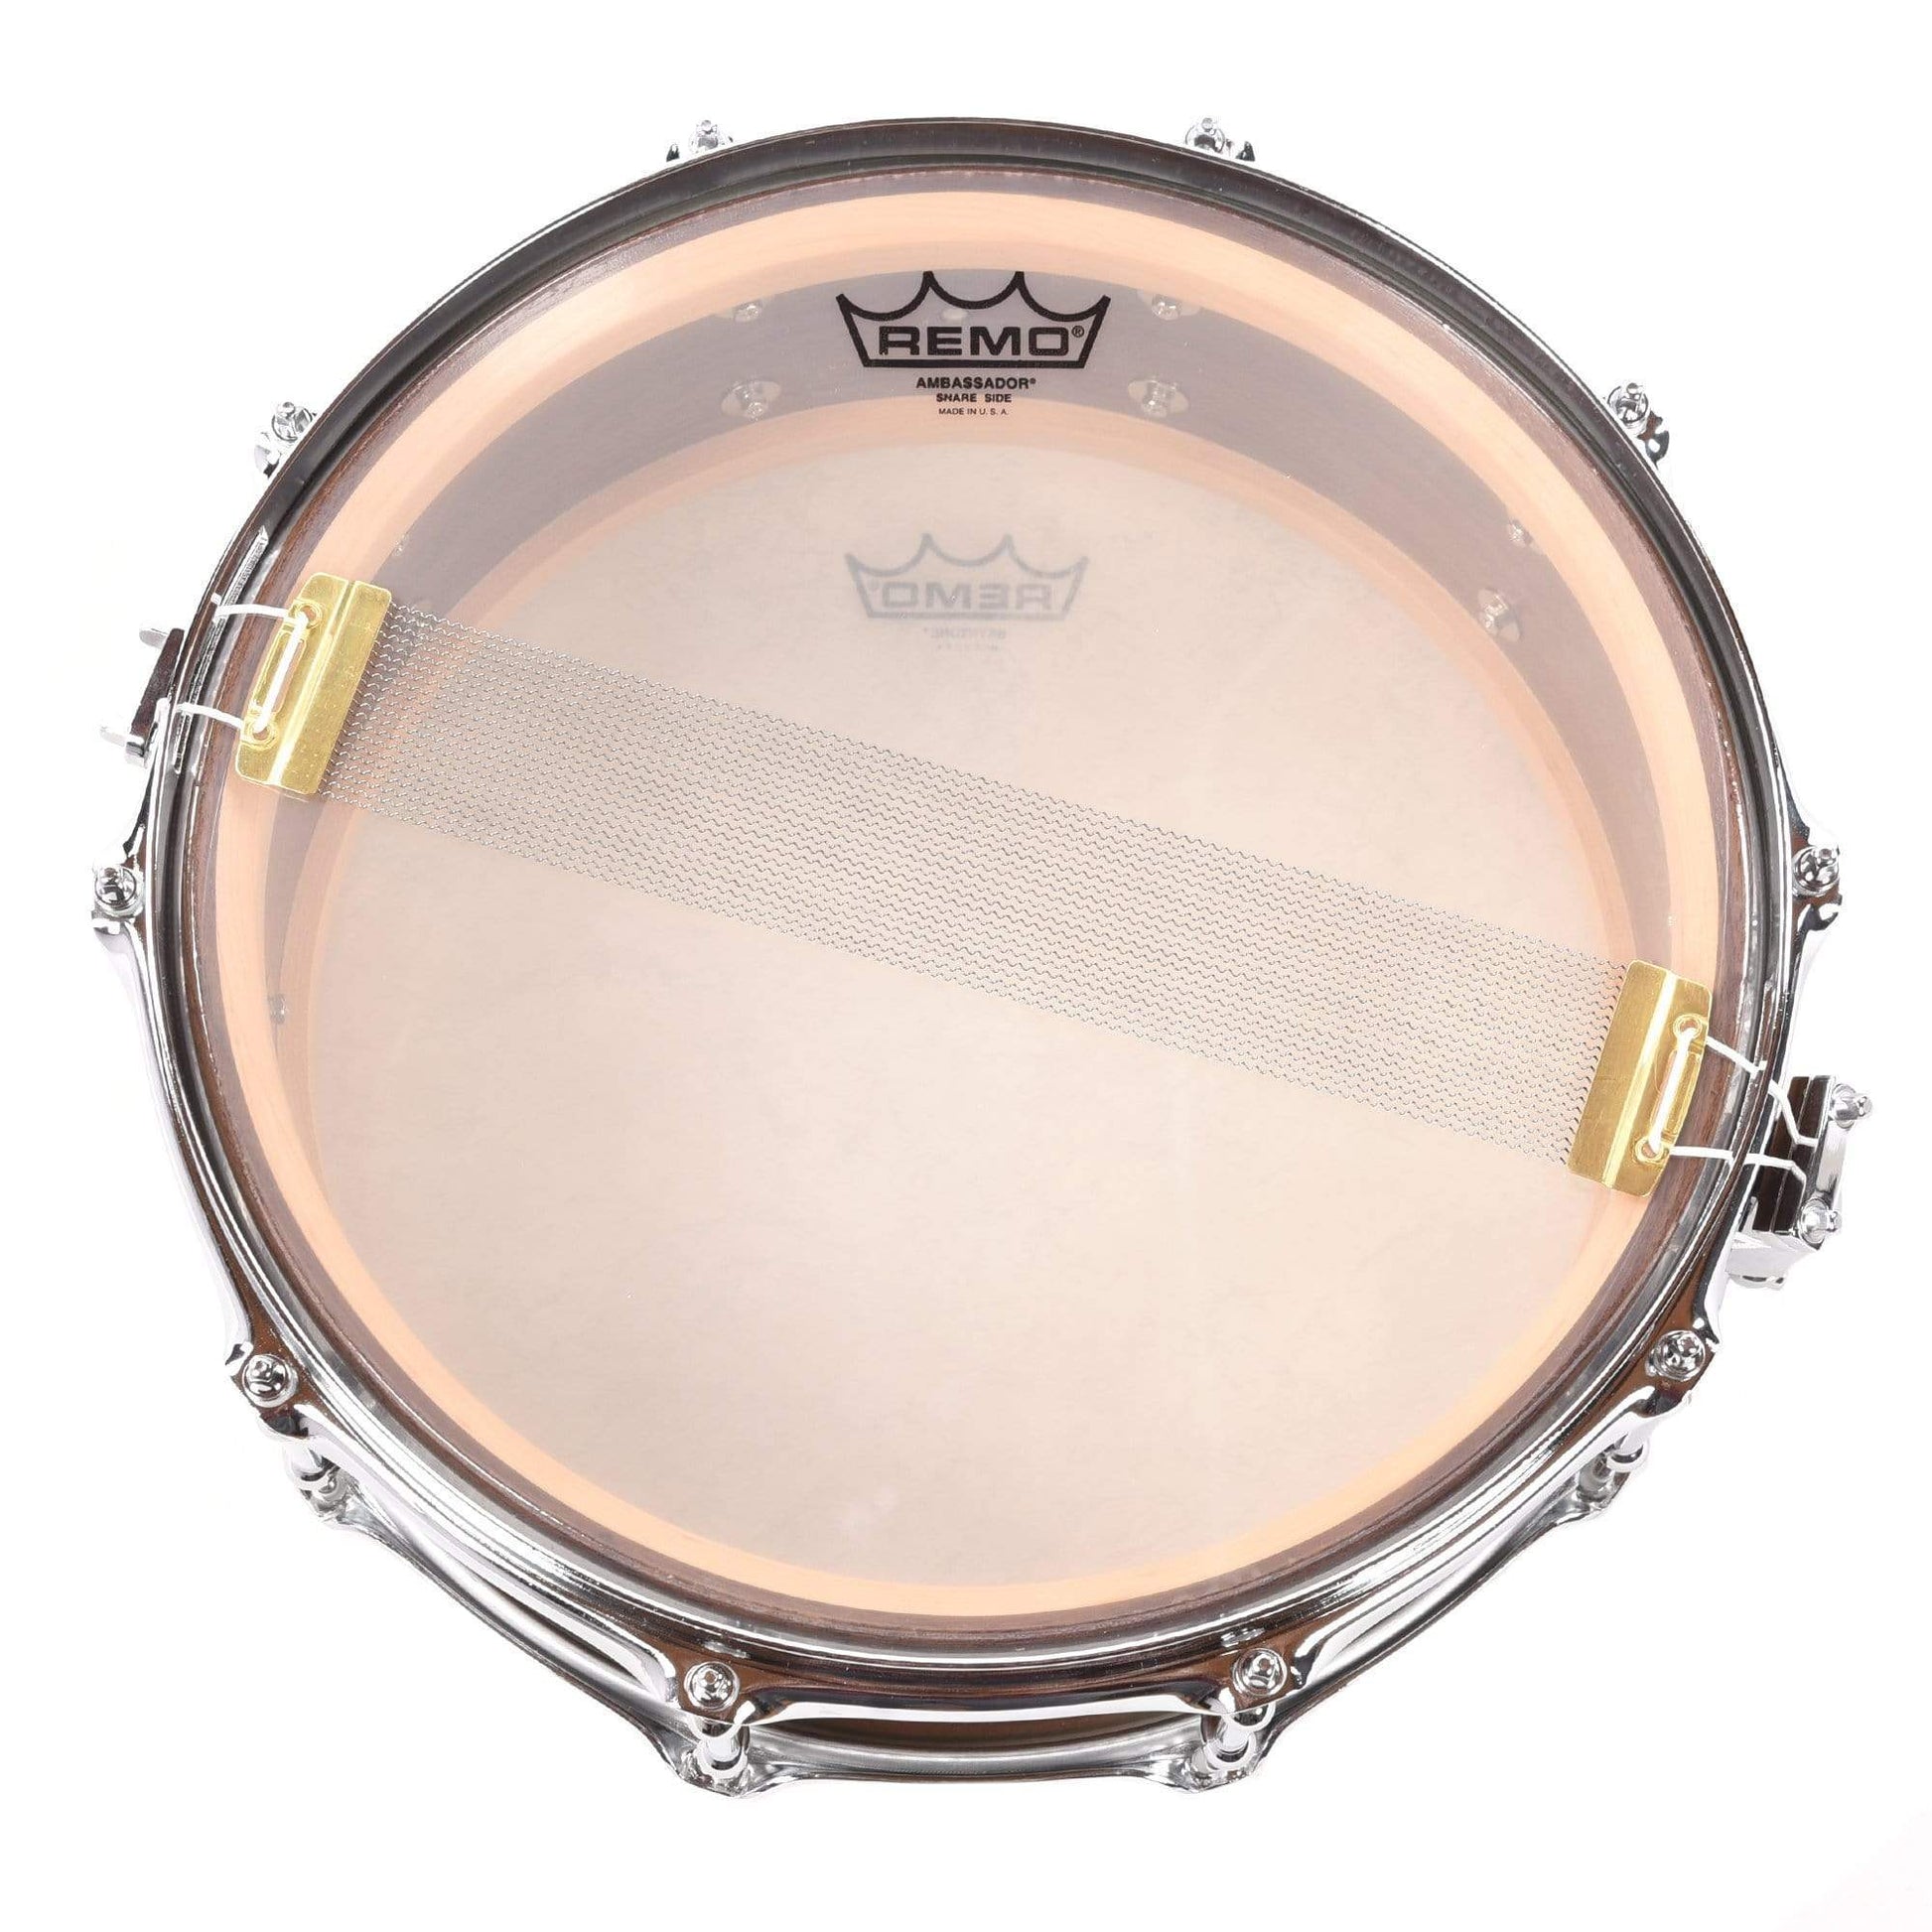 Doc Sweeney 5.5x14 Classic Series Solid Shell Walnut Snare Drum Drums and Percussion / Acoustic Drums / Snare